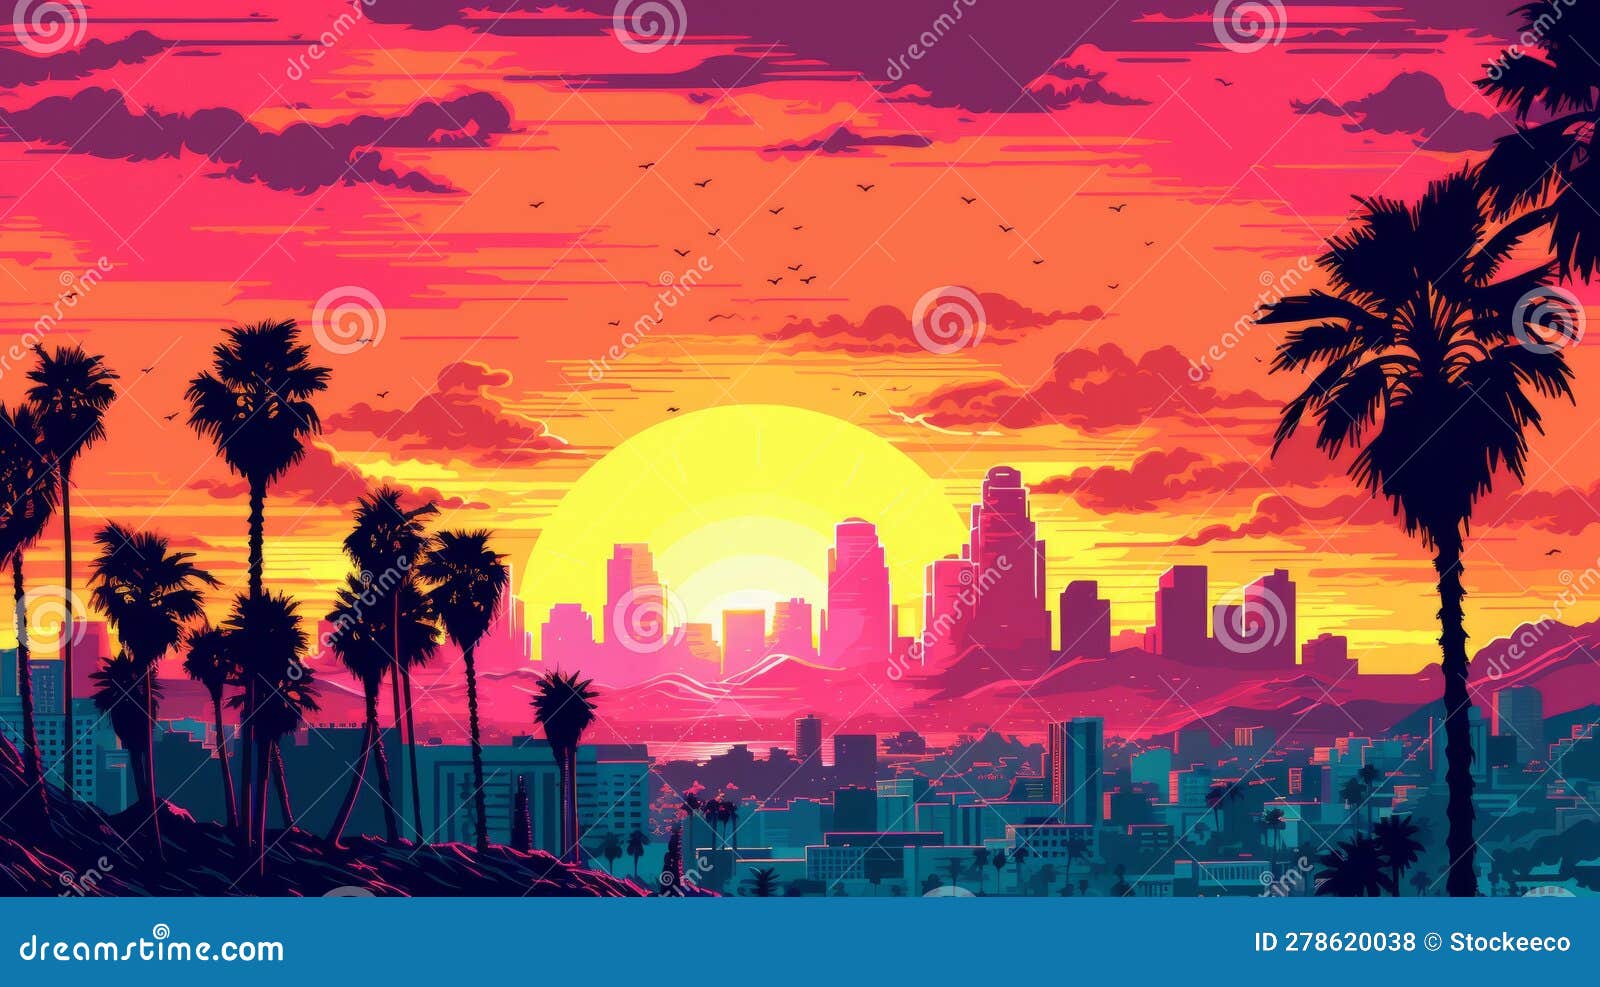 Los Angeles Sunset in 1830s: a Pixel Art Close-up Stock Illustration ...